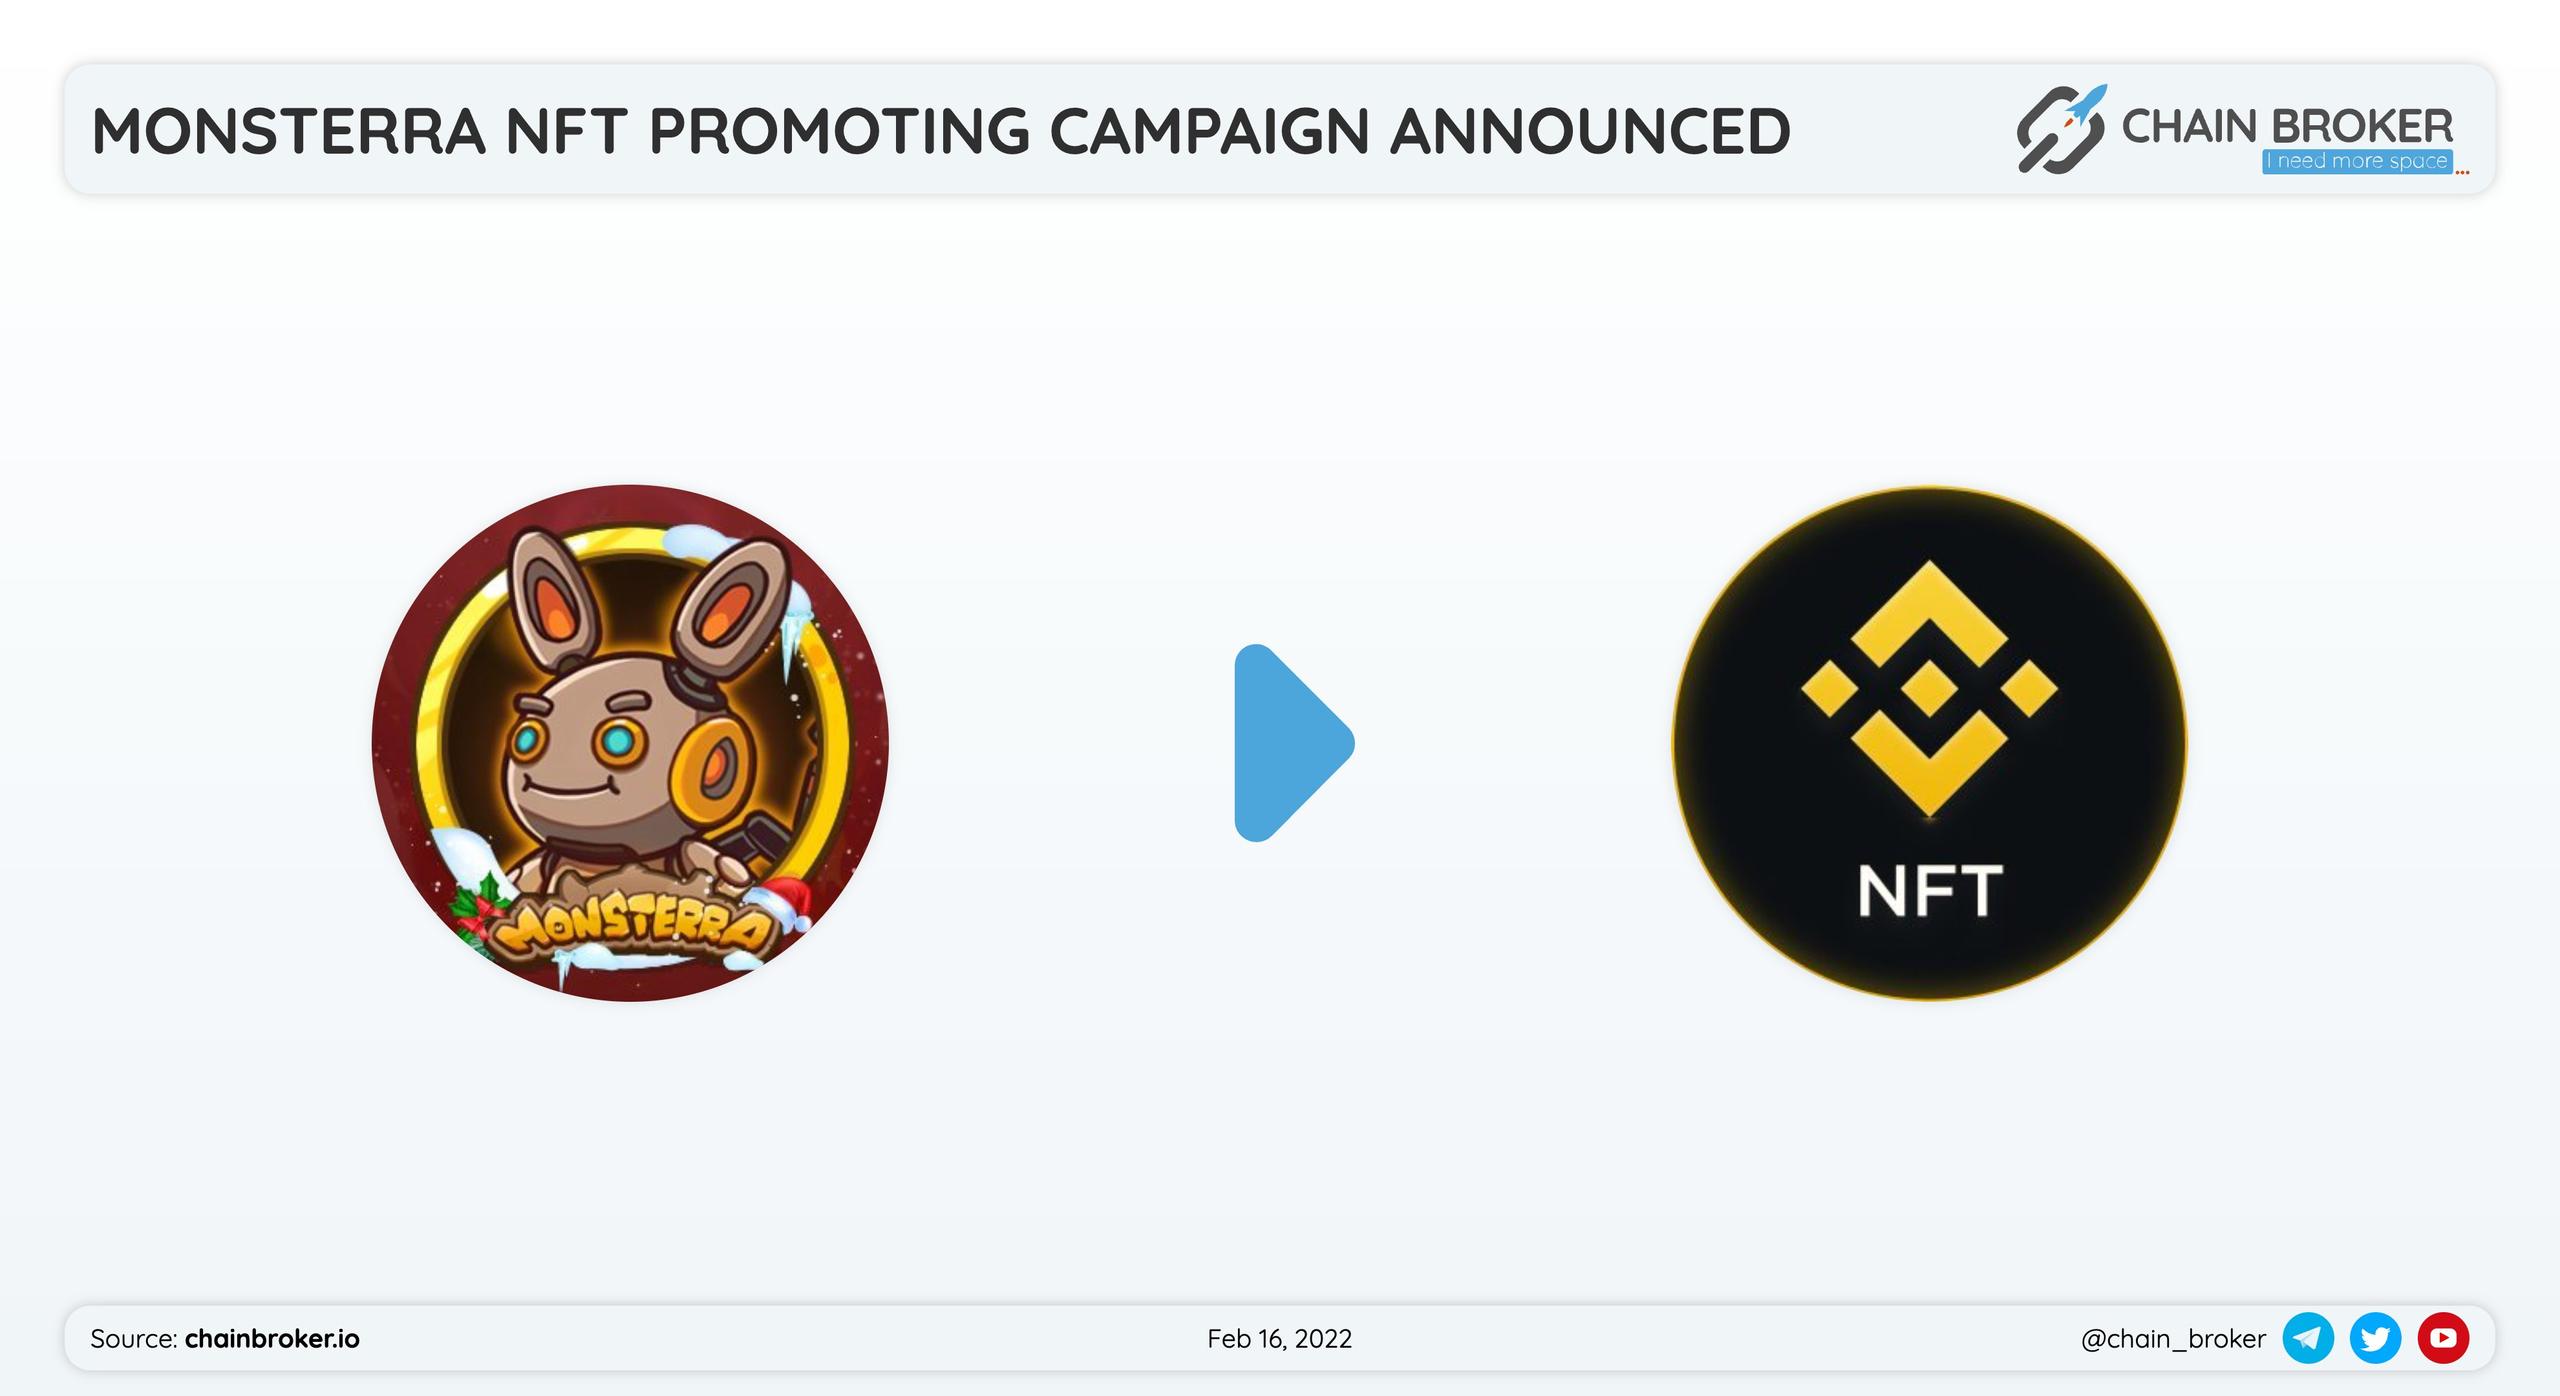 Monsterra has partnered with The BinanceNFT for an NFT promotion campaign.